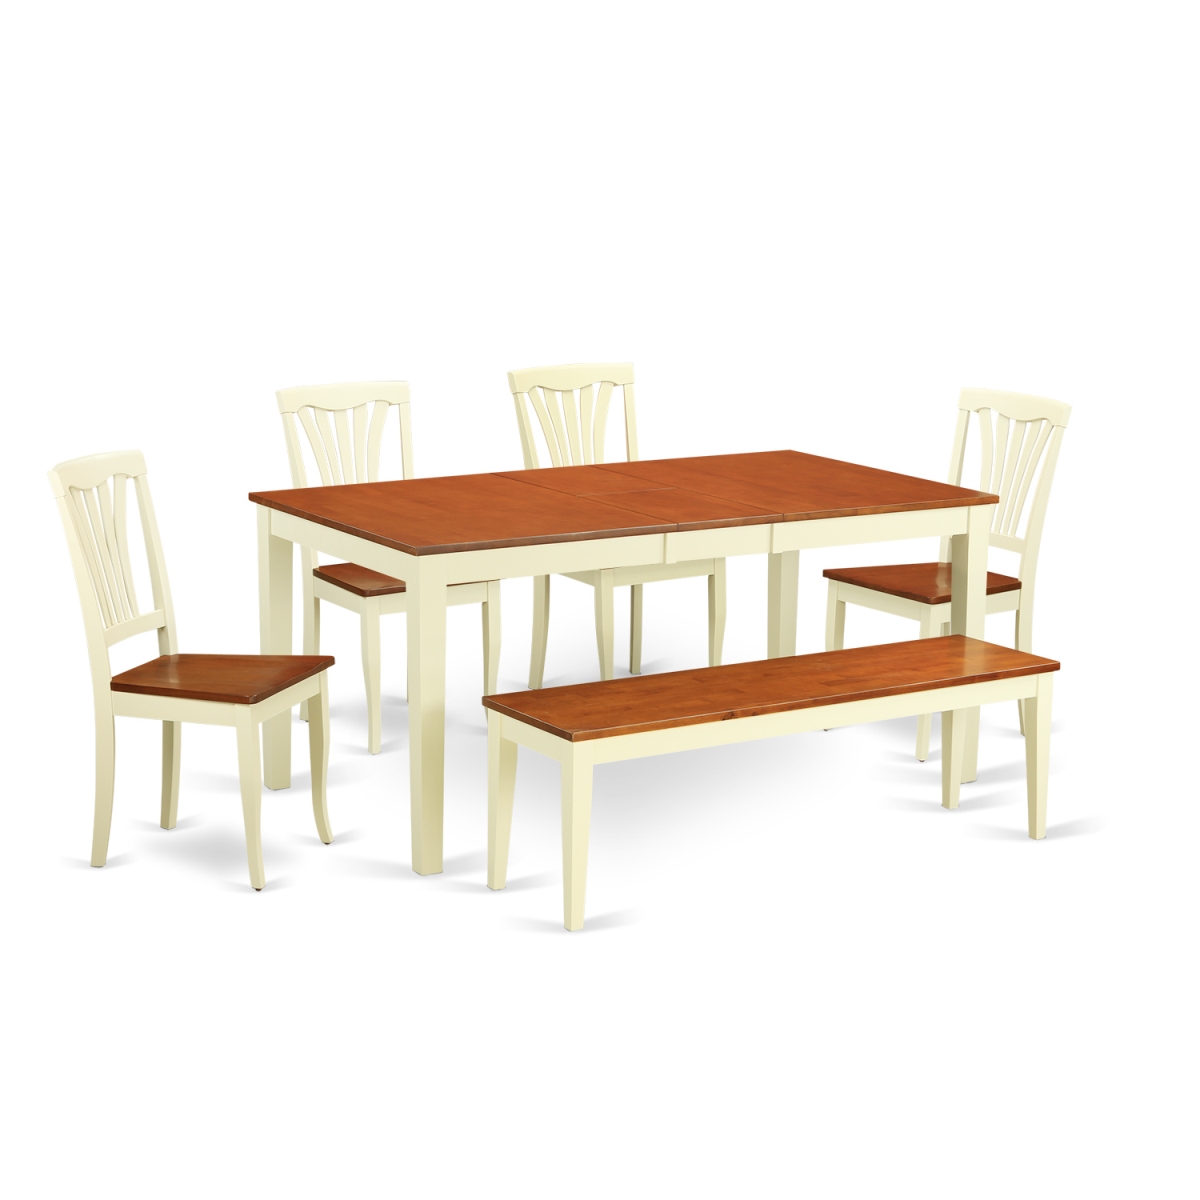 NIAV6-WHI-W Dining Room Set - Kitchen Table & 4 Chairs Along with a Bench, Buttermilk & Cherry - 6 Piece -  East West Furniture